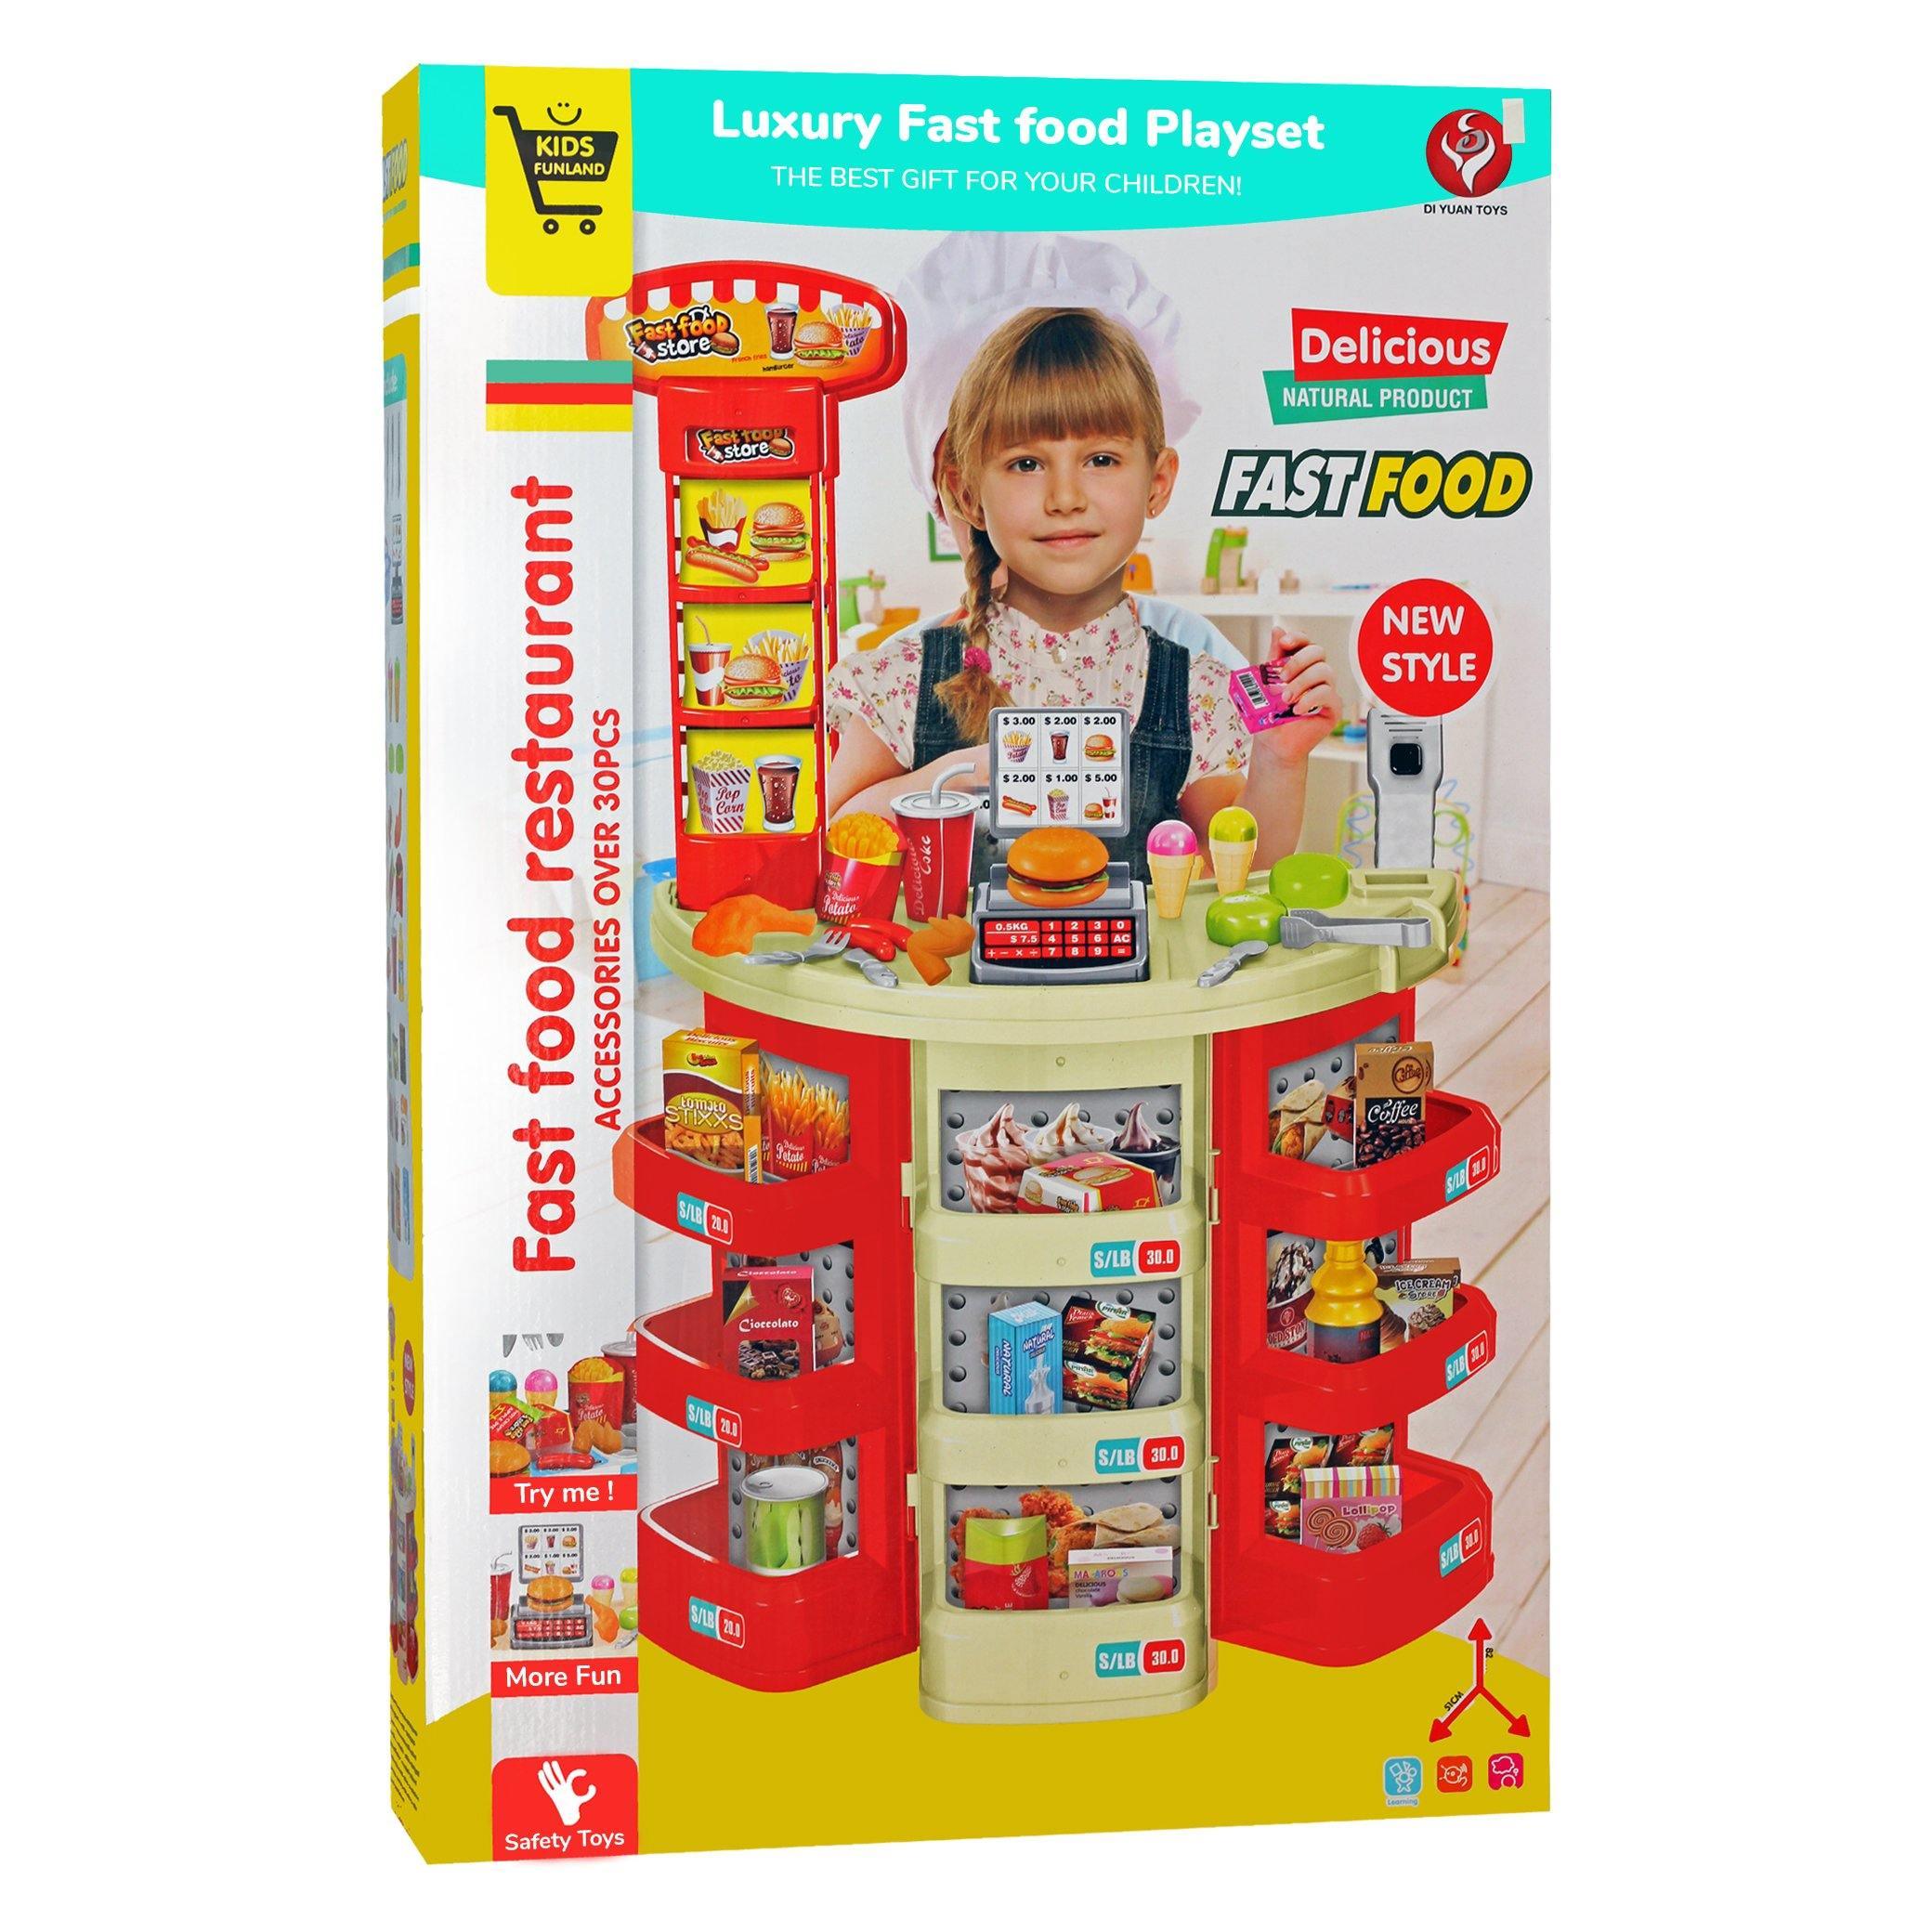 Luxury Fast Food Toy Playset supermarket With cashier and over 30 Accessories - BumbleToys - 5-7 Years, Boys, Girls, Kitchen & Play Sets, Toy House